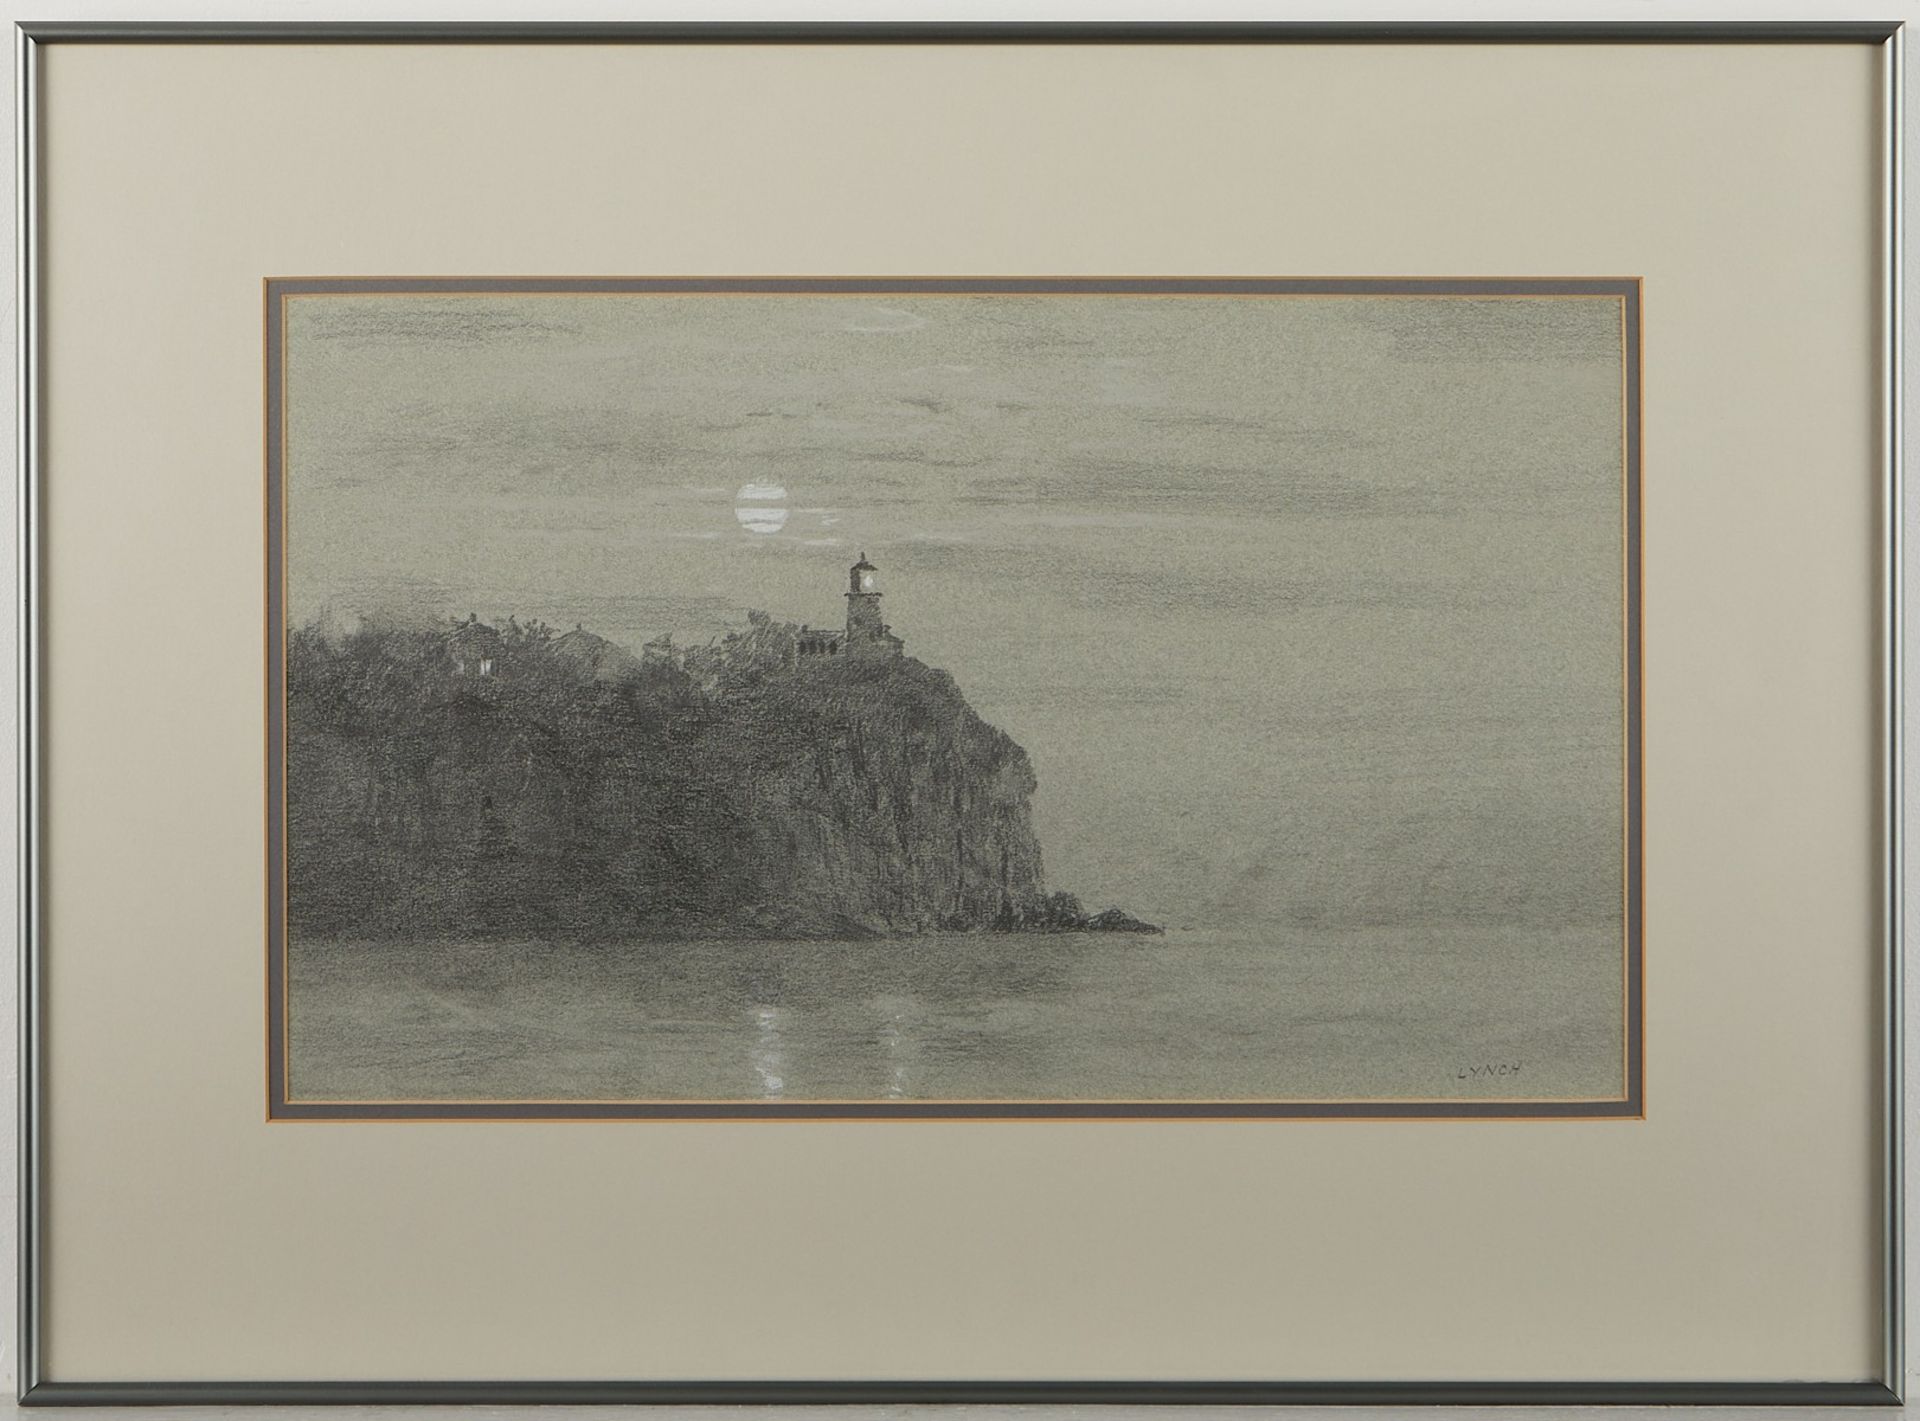 Mike Lynch Split Rock Lighthouse Charcoal Drawing - Image 3 of 5